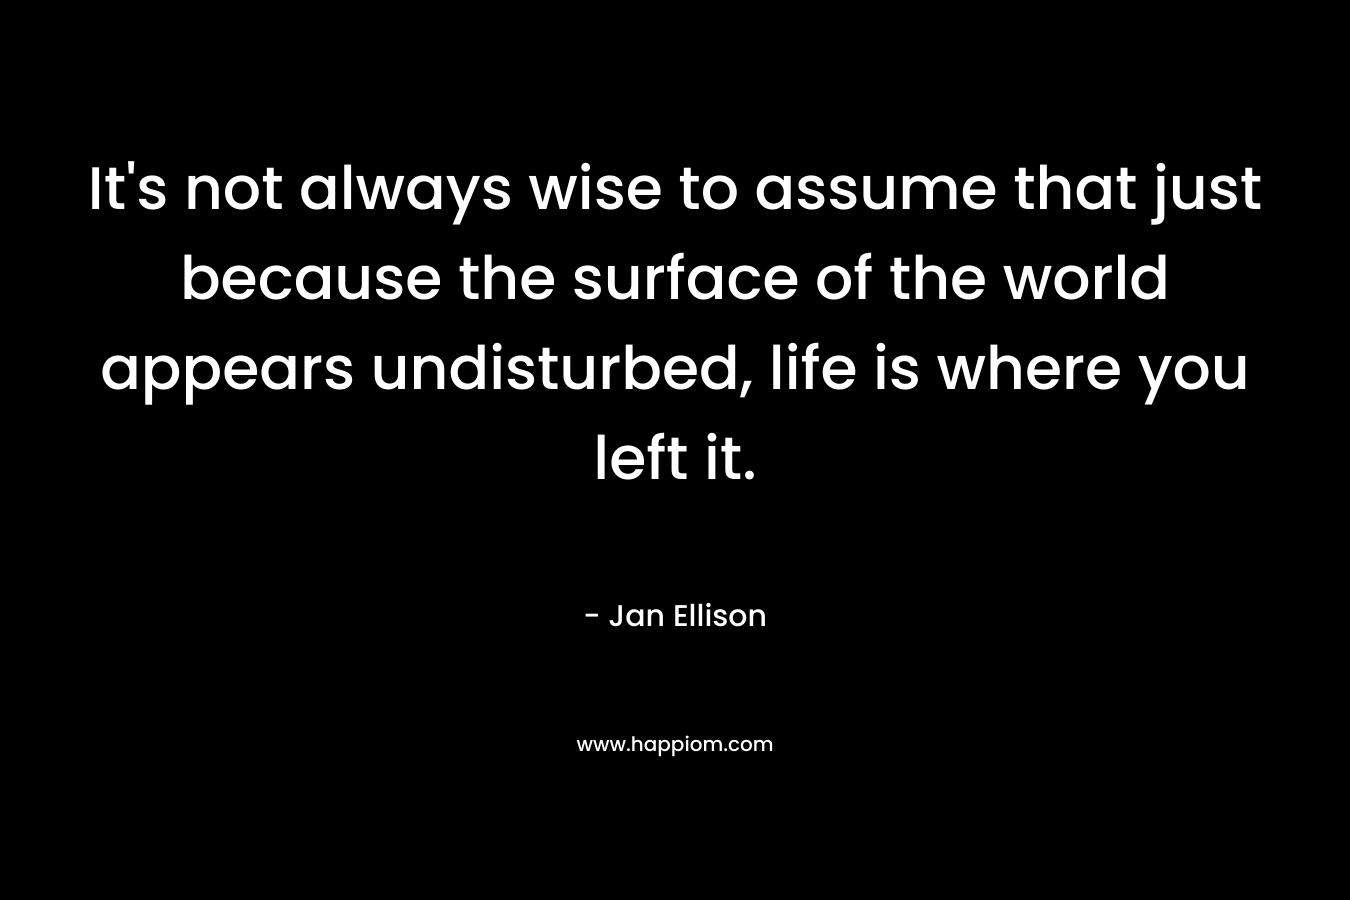 It’s not always wise to assume that just because the surface of the world appears undisturbed, life is where you left it. – Jan Ellison